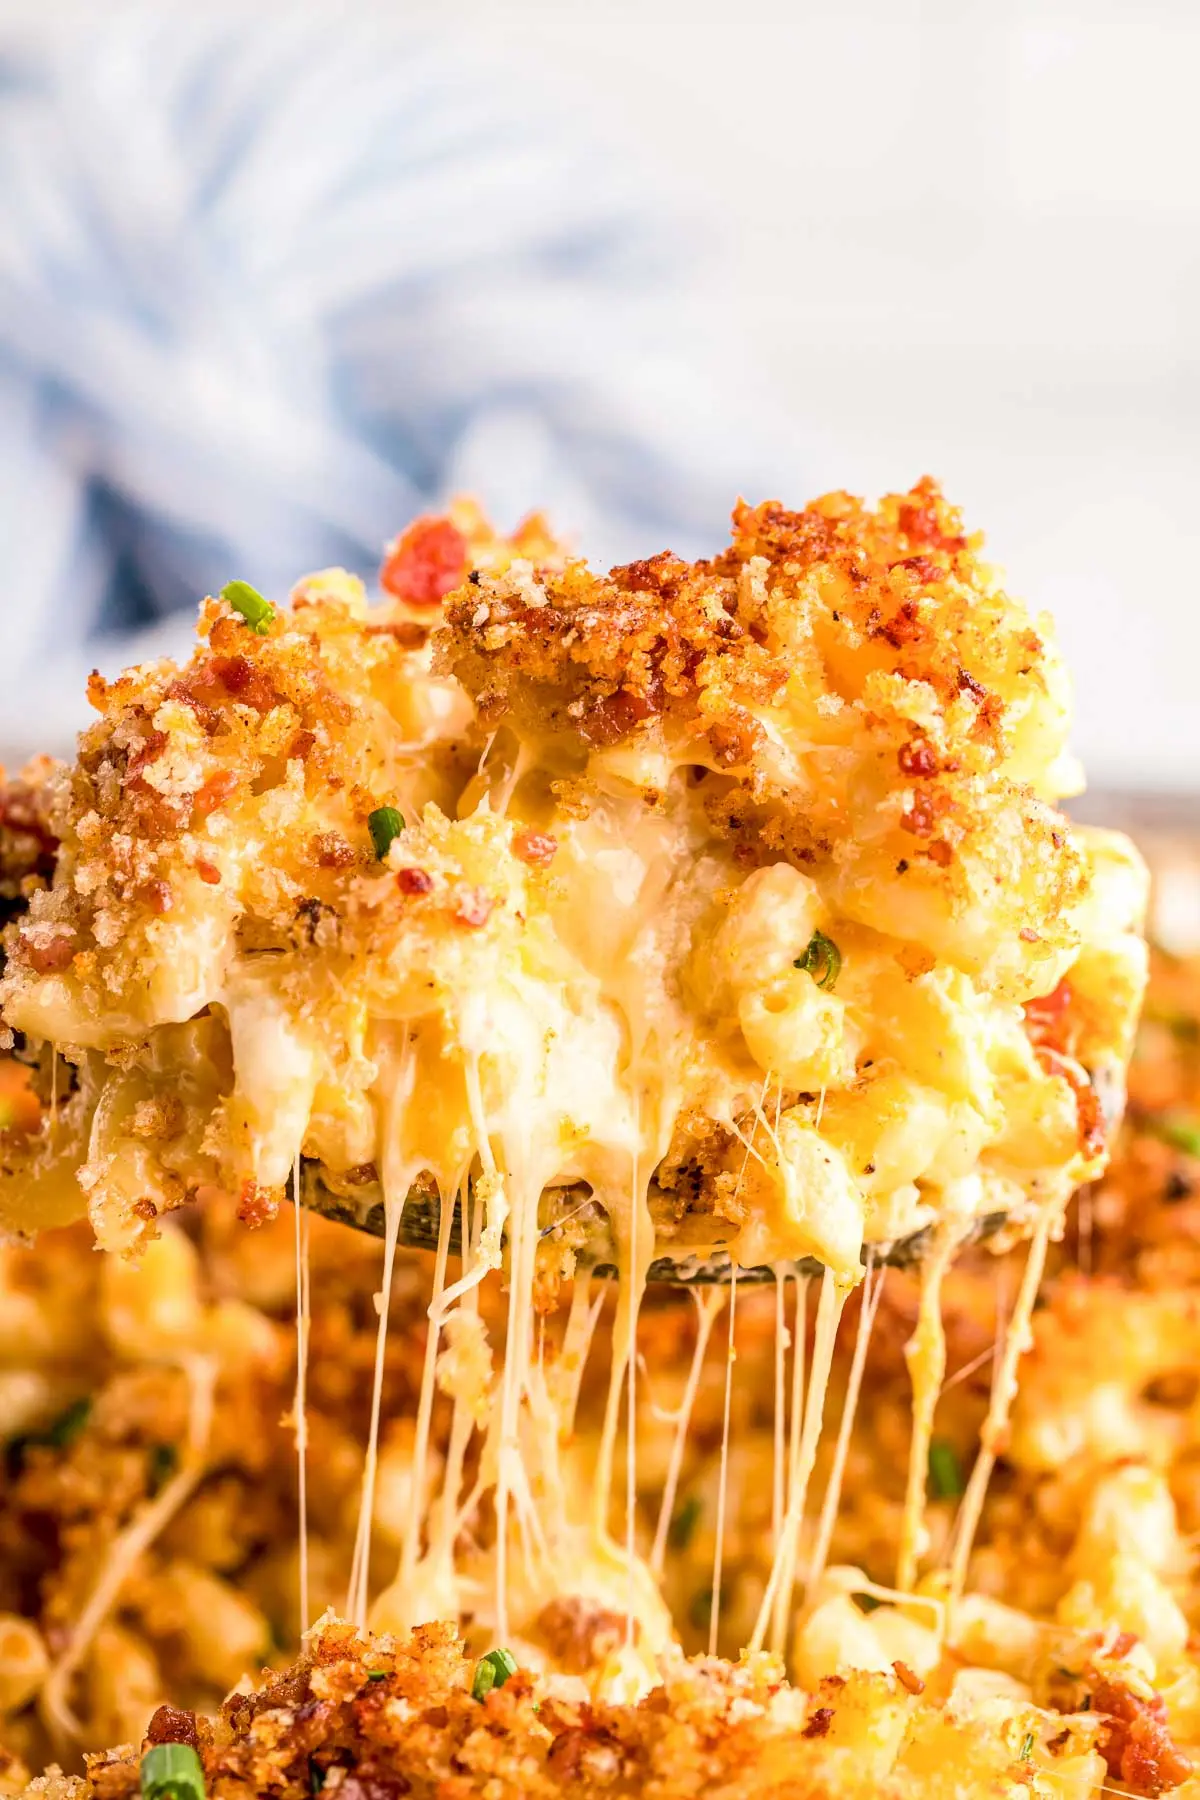 smoked mac and cheese with panko bread crumbs - Why would you add breadcrumbs to the top of the macaroni and cheese before baking